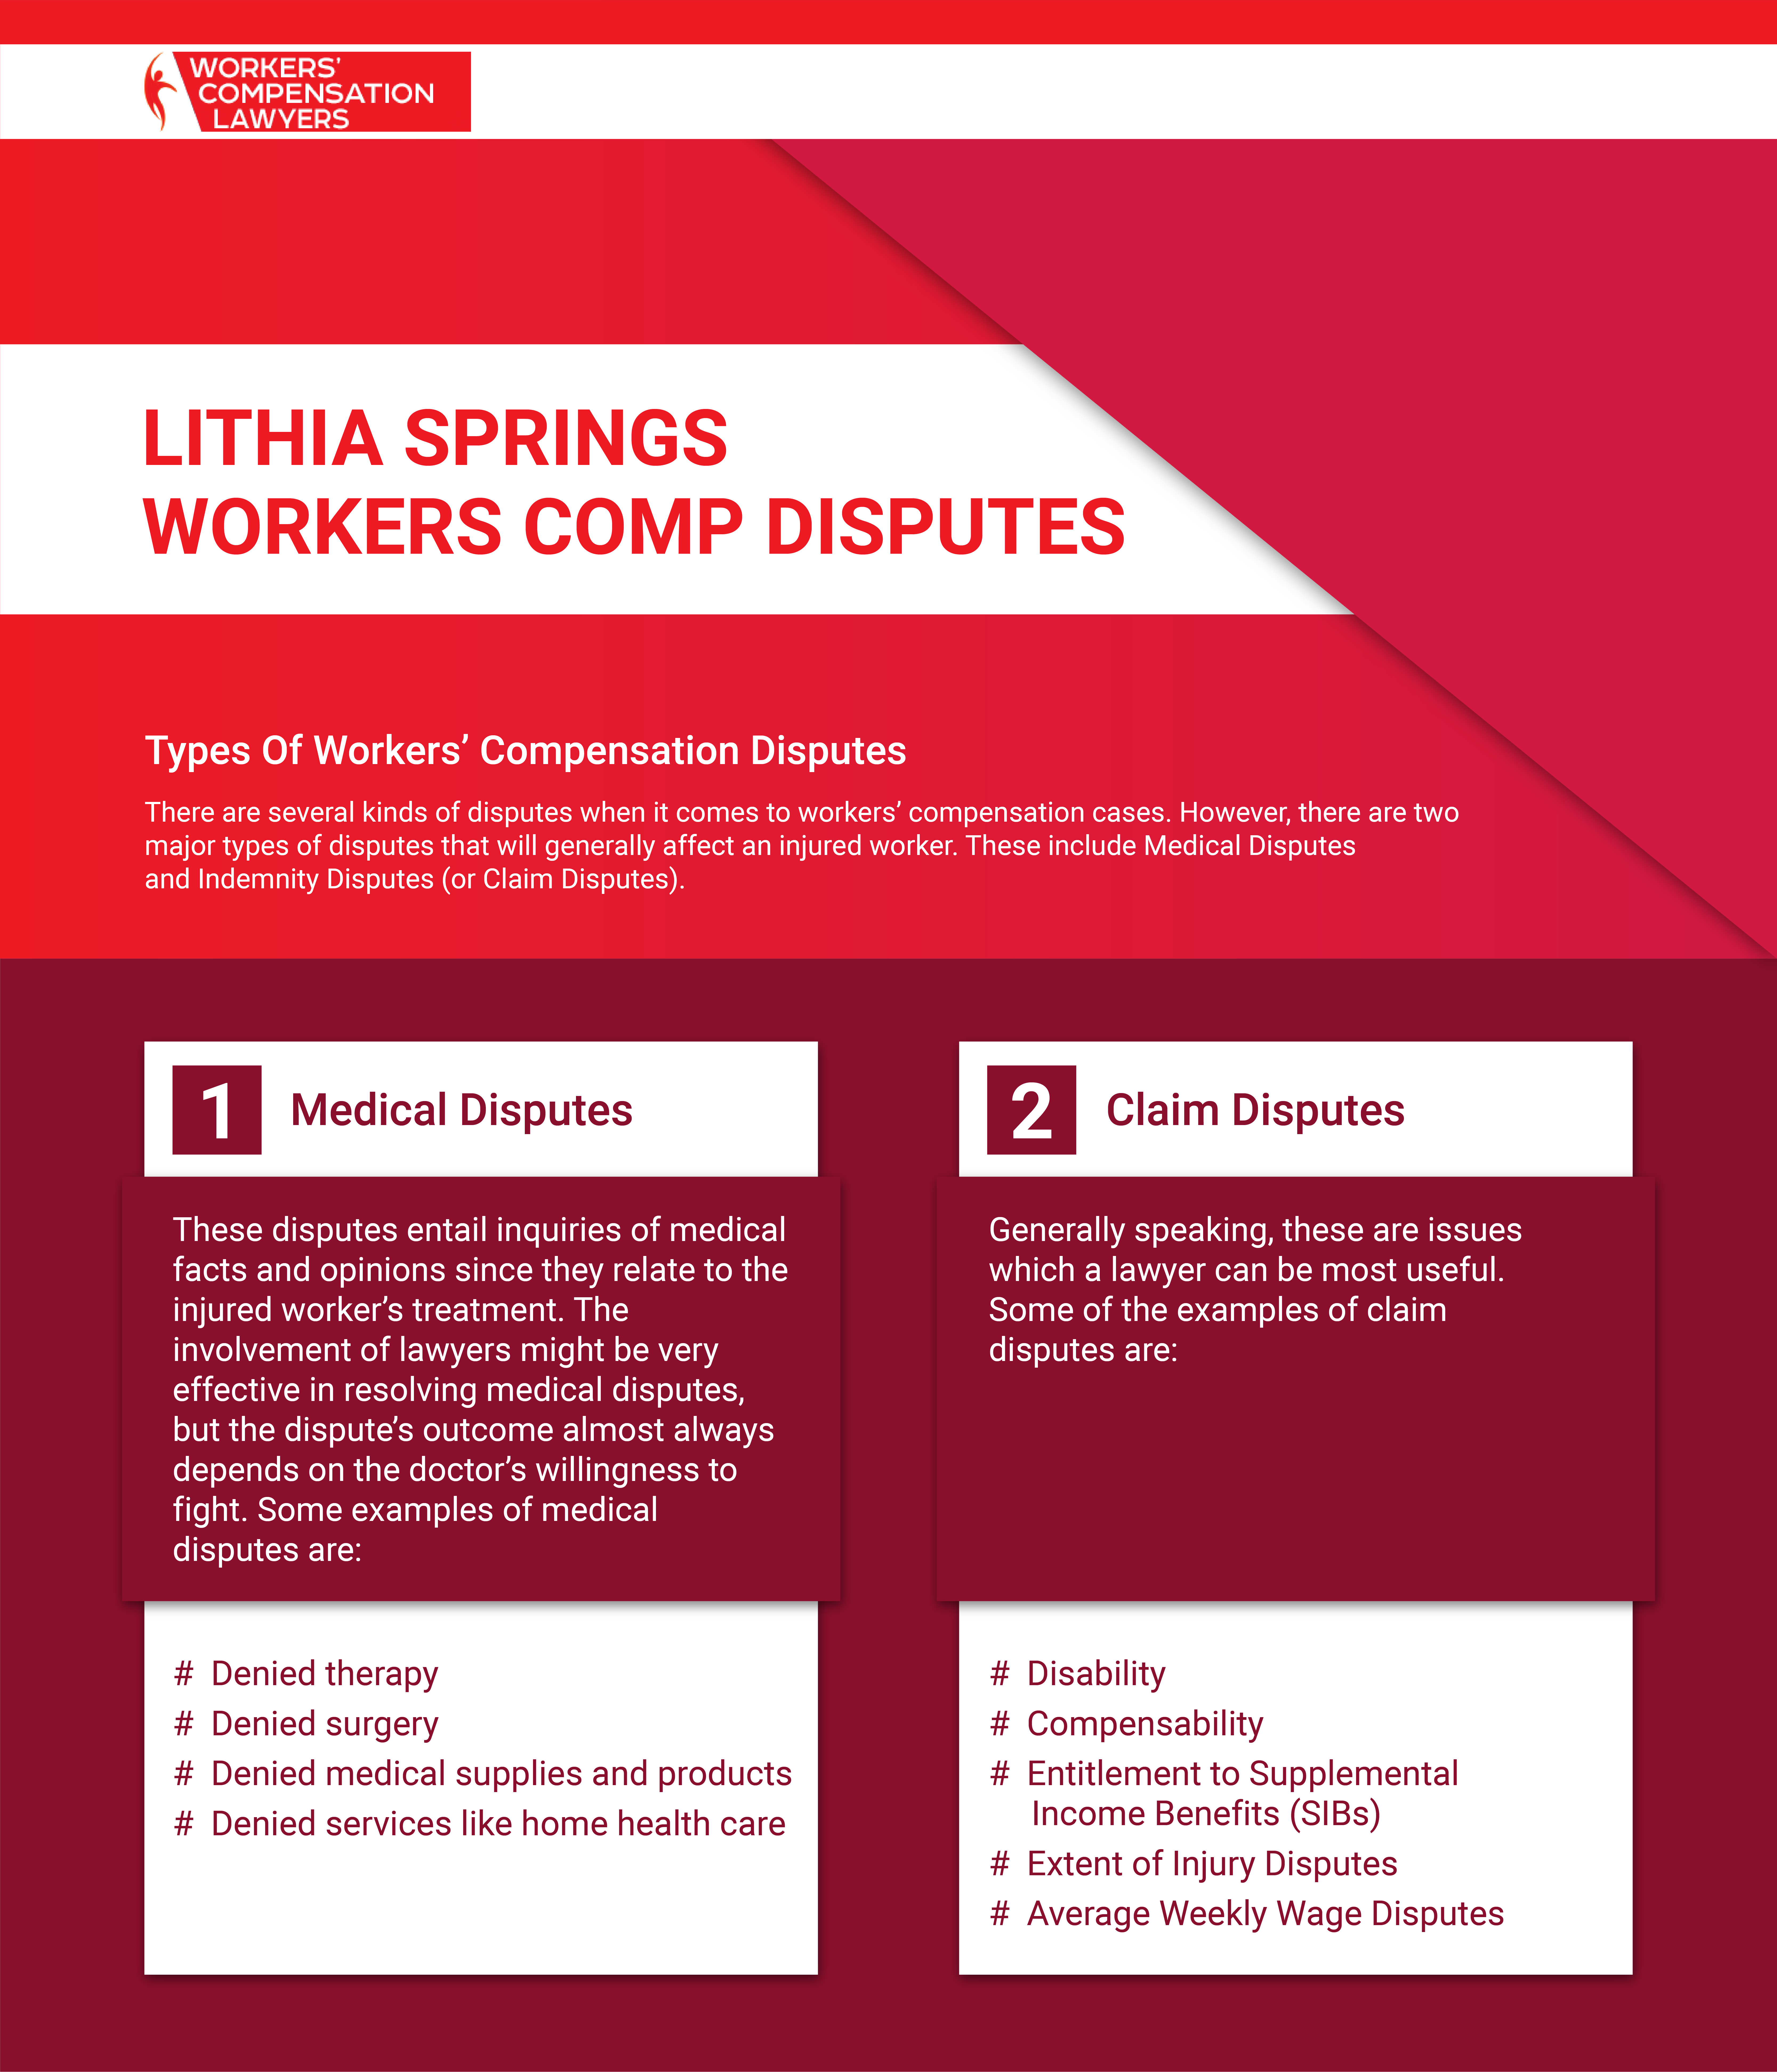 Lithia Springs Workers Compensation Disputes Infographic